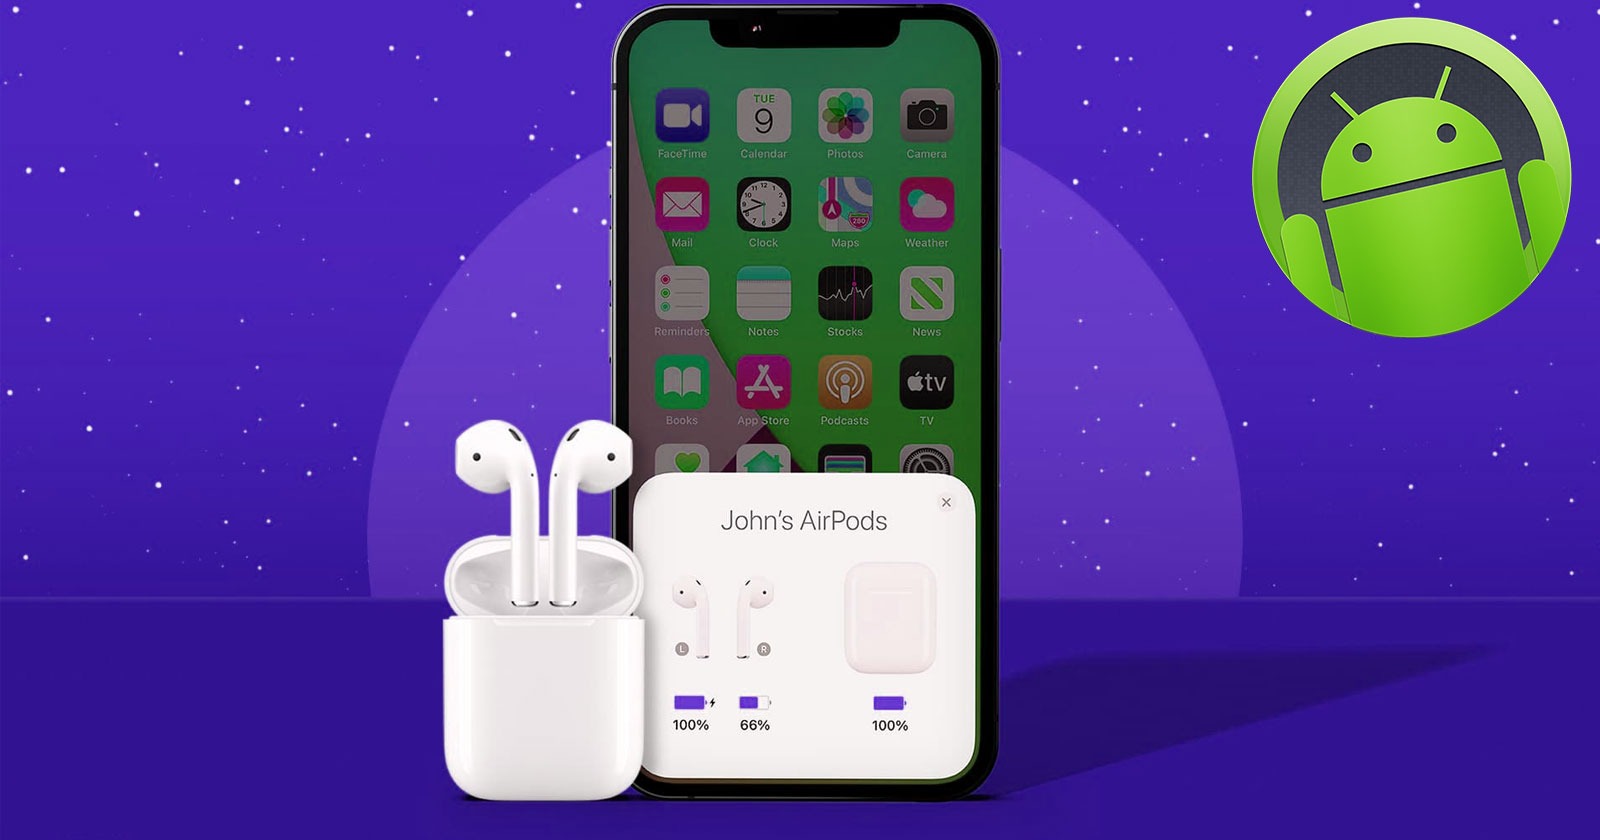 How to Check AirPods Battery on Android Without App